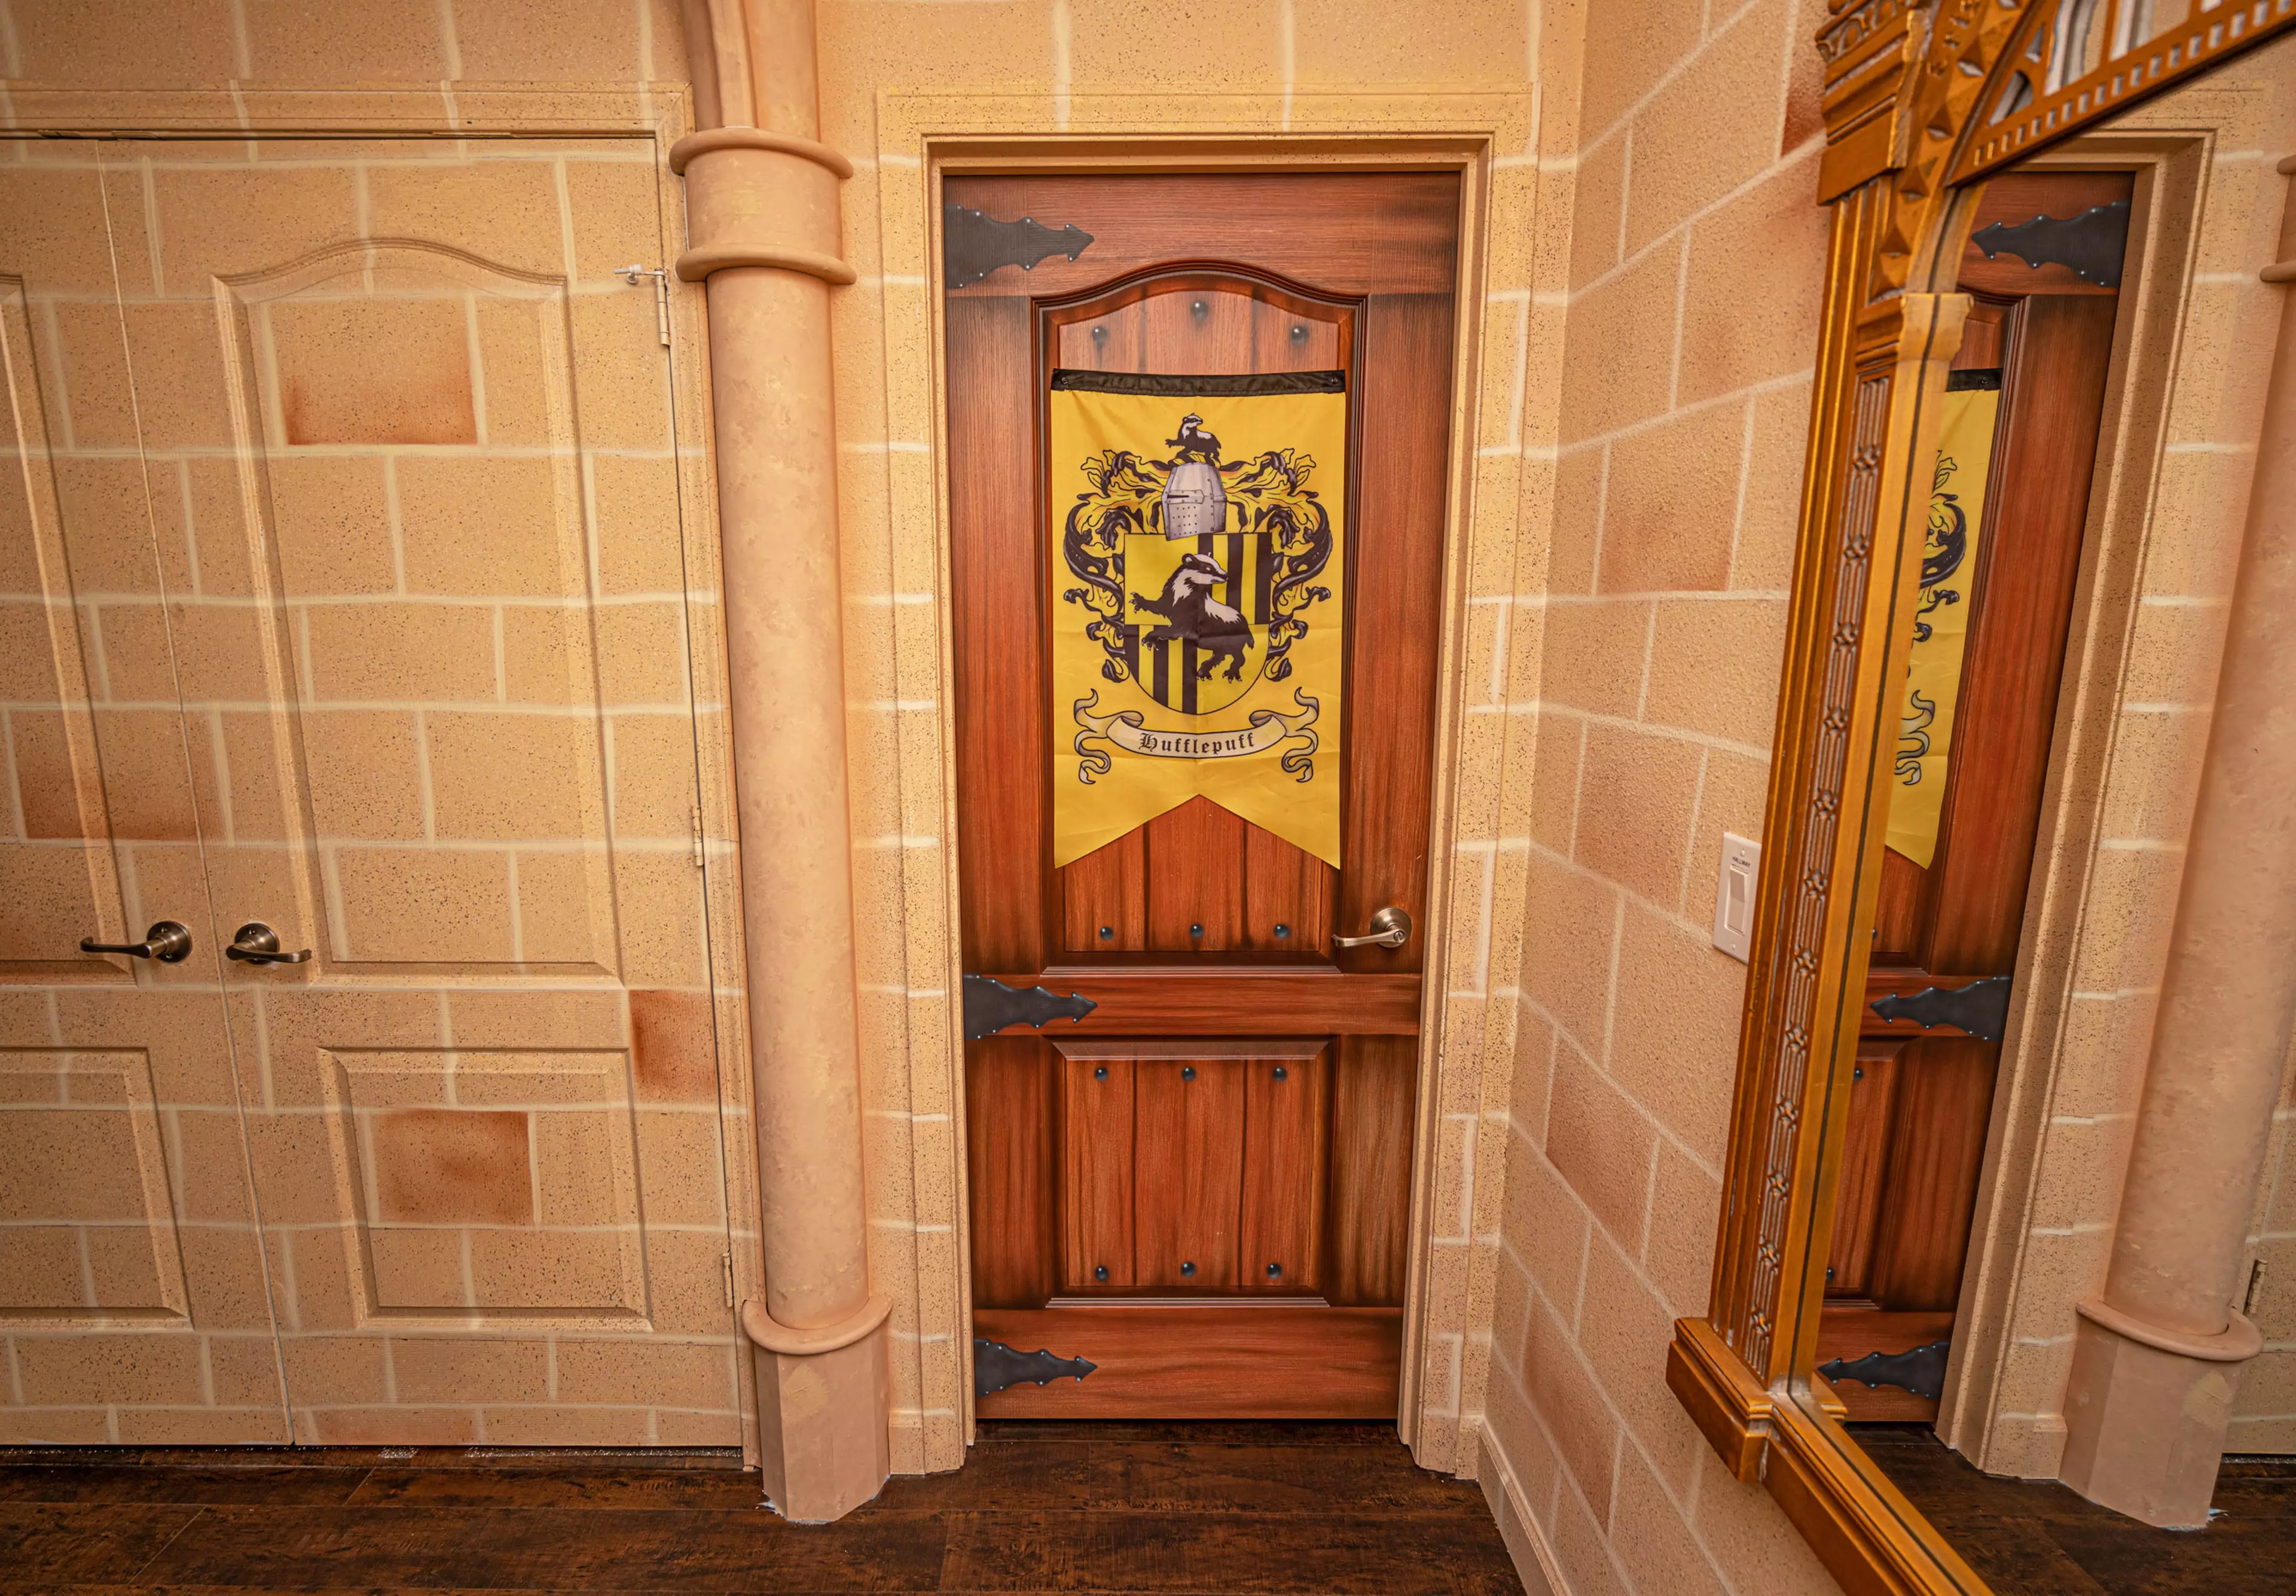 Even the doors have the house banners (